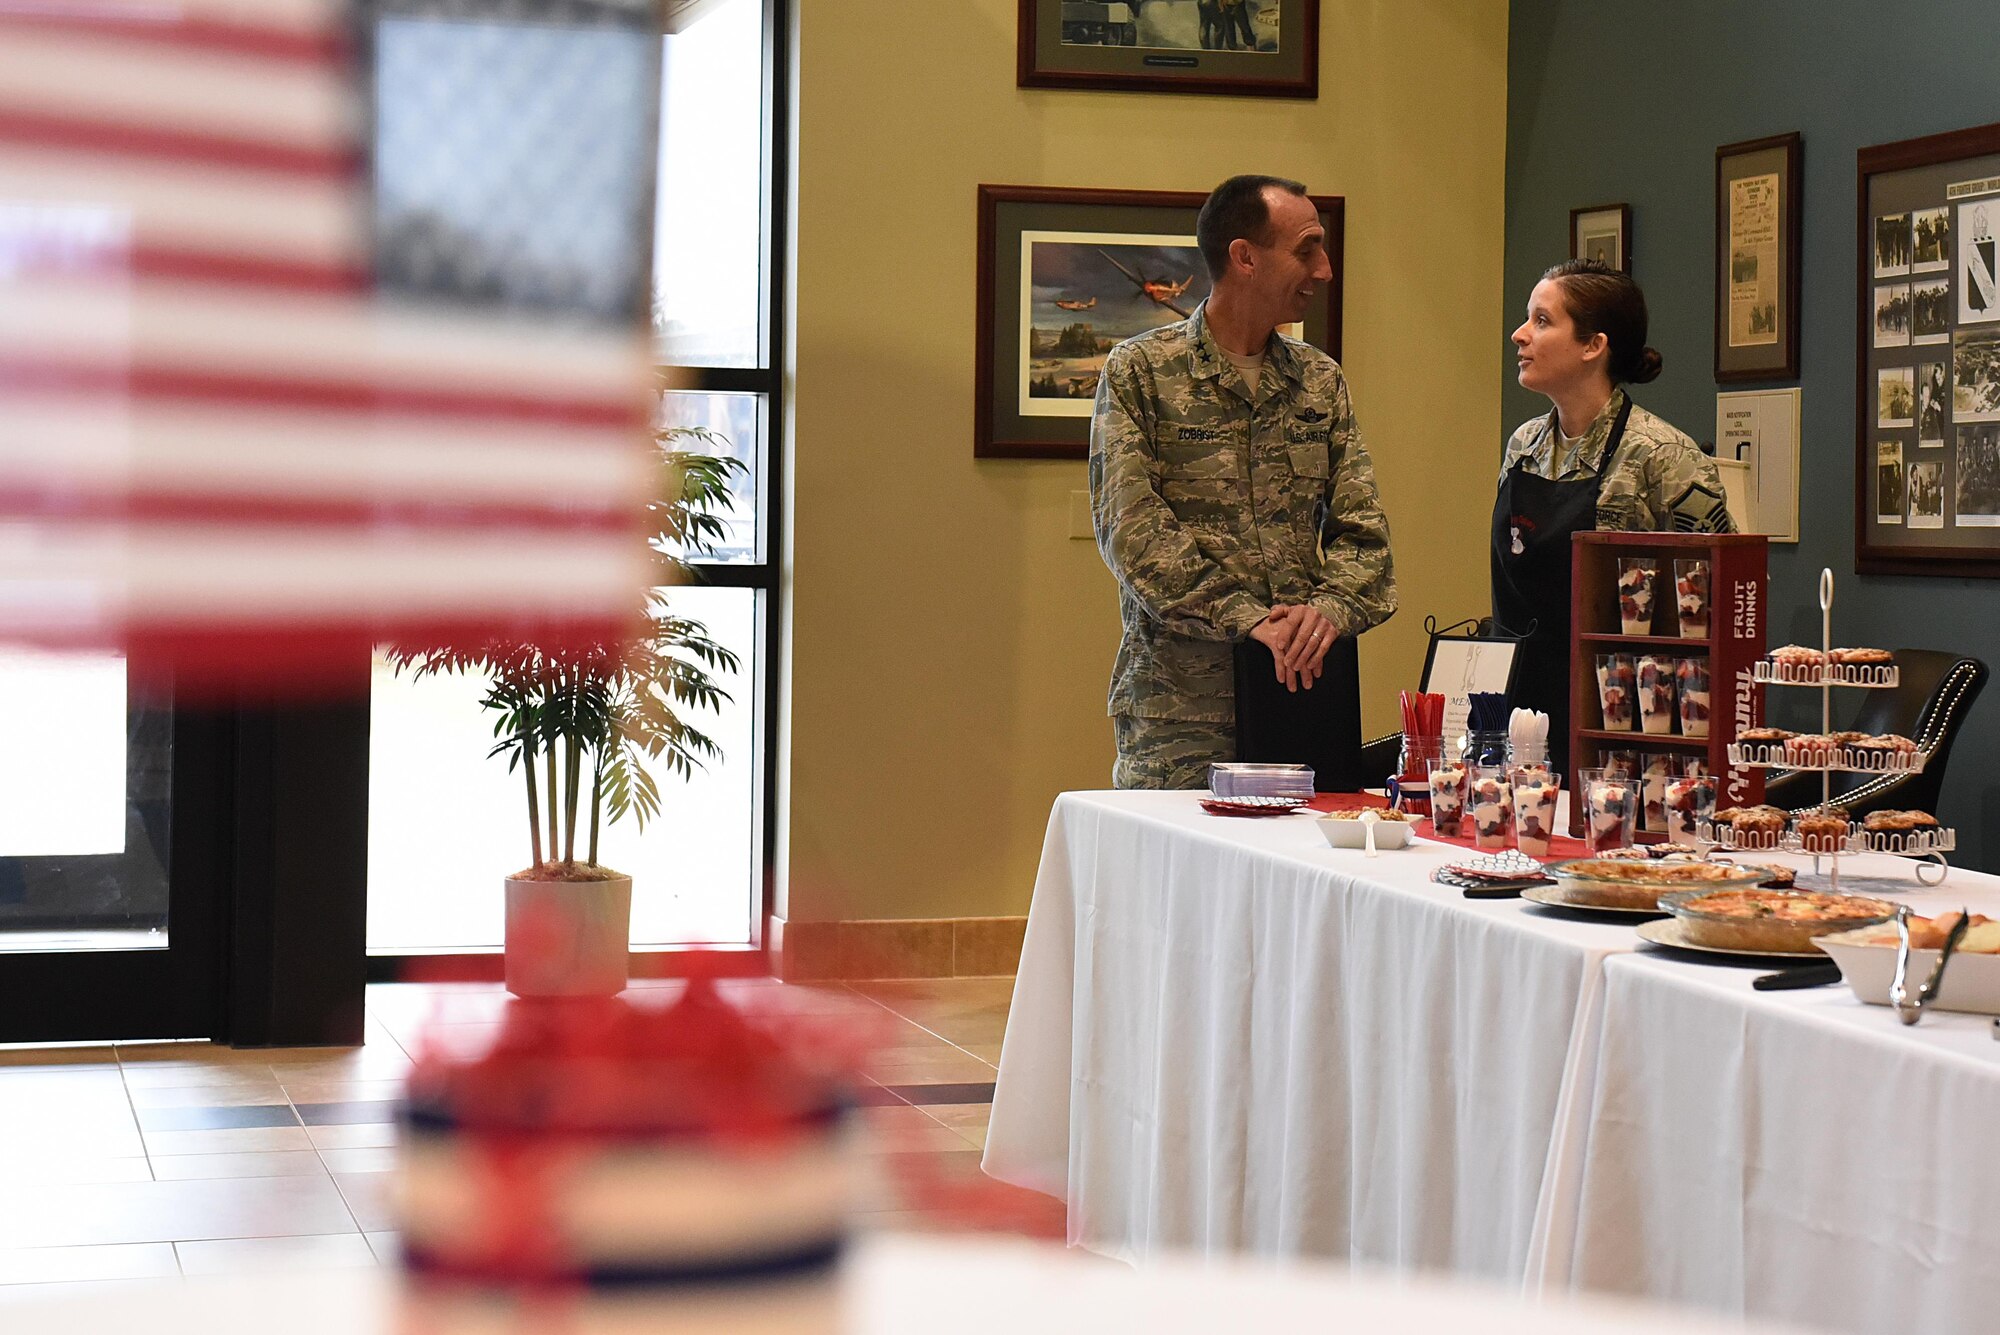 U.S. Air Force Maj. Gen. Scott Zobrist (left), 9th Air Force commander, talks with Master Sgt. Katie Neeley, 4th Aerospace Medicine Squadron superintendent, at Seymour Johnson Air Force Base, N.C., Feb. 15, 2017. Neeley and other members of the Make It Better culinary club showcased their cooking skills by preparing breakfast for Zobrist and approximately 20 other wing leaders and their spouses during his visit. (U.S. Air Force photo by Airman 1st Class Kenneth Boyton)